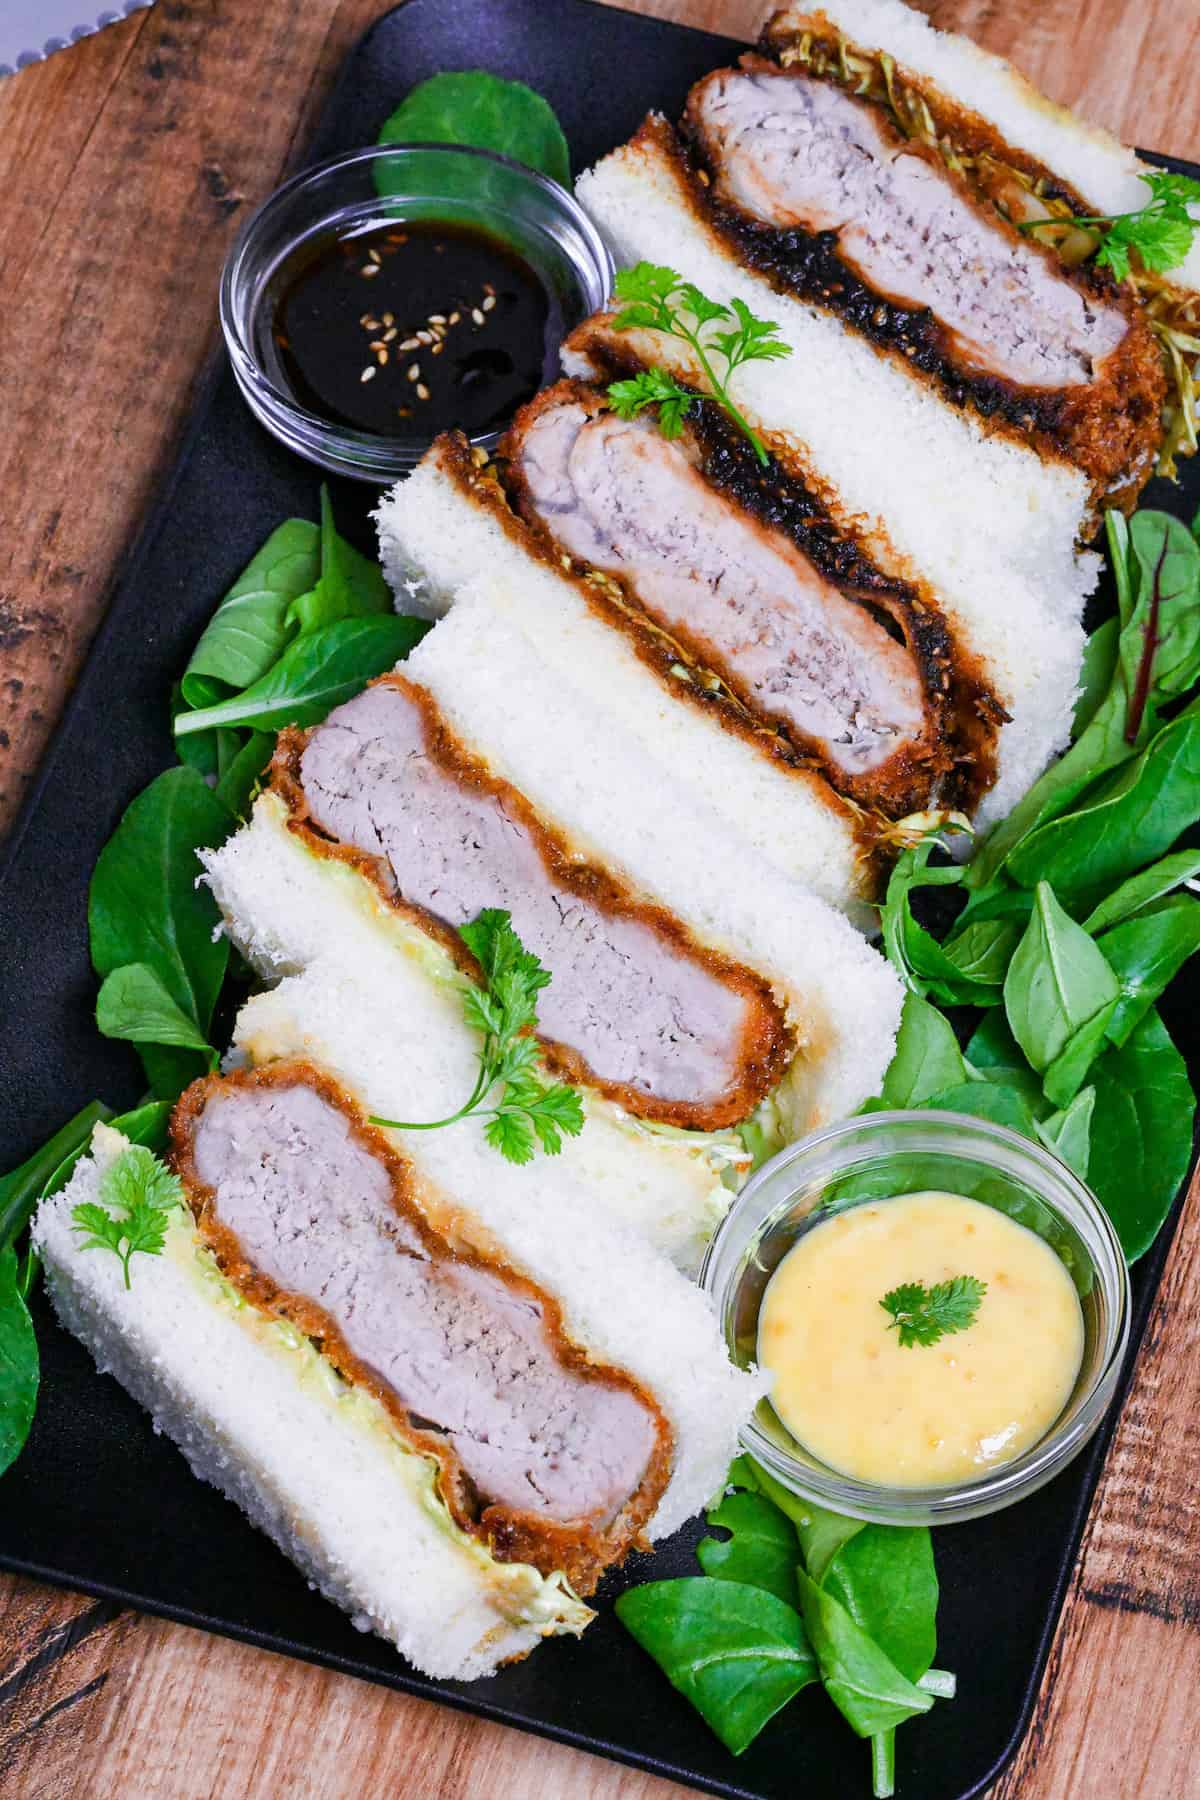 4 katsu sando made with two kinds of sauce on a black plate surrounded by baby leaf salad on a wood-effect background